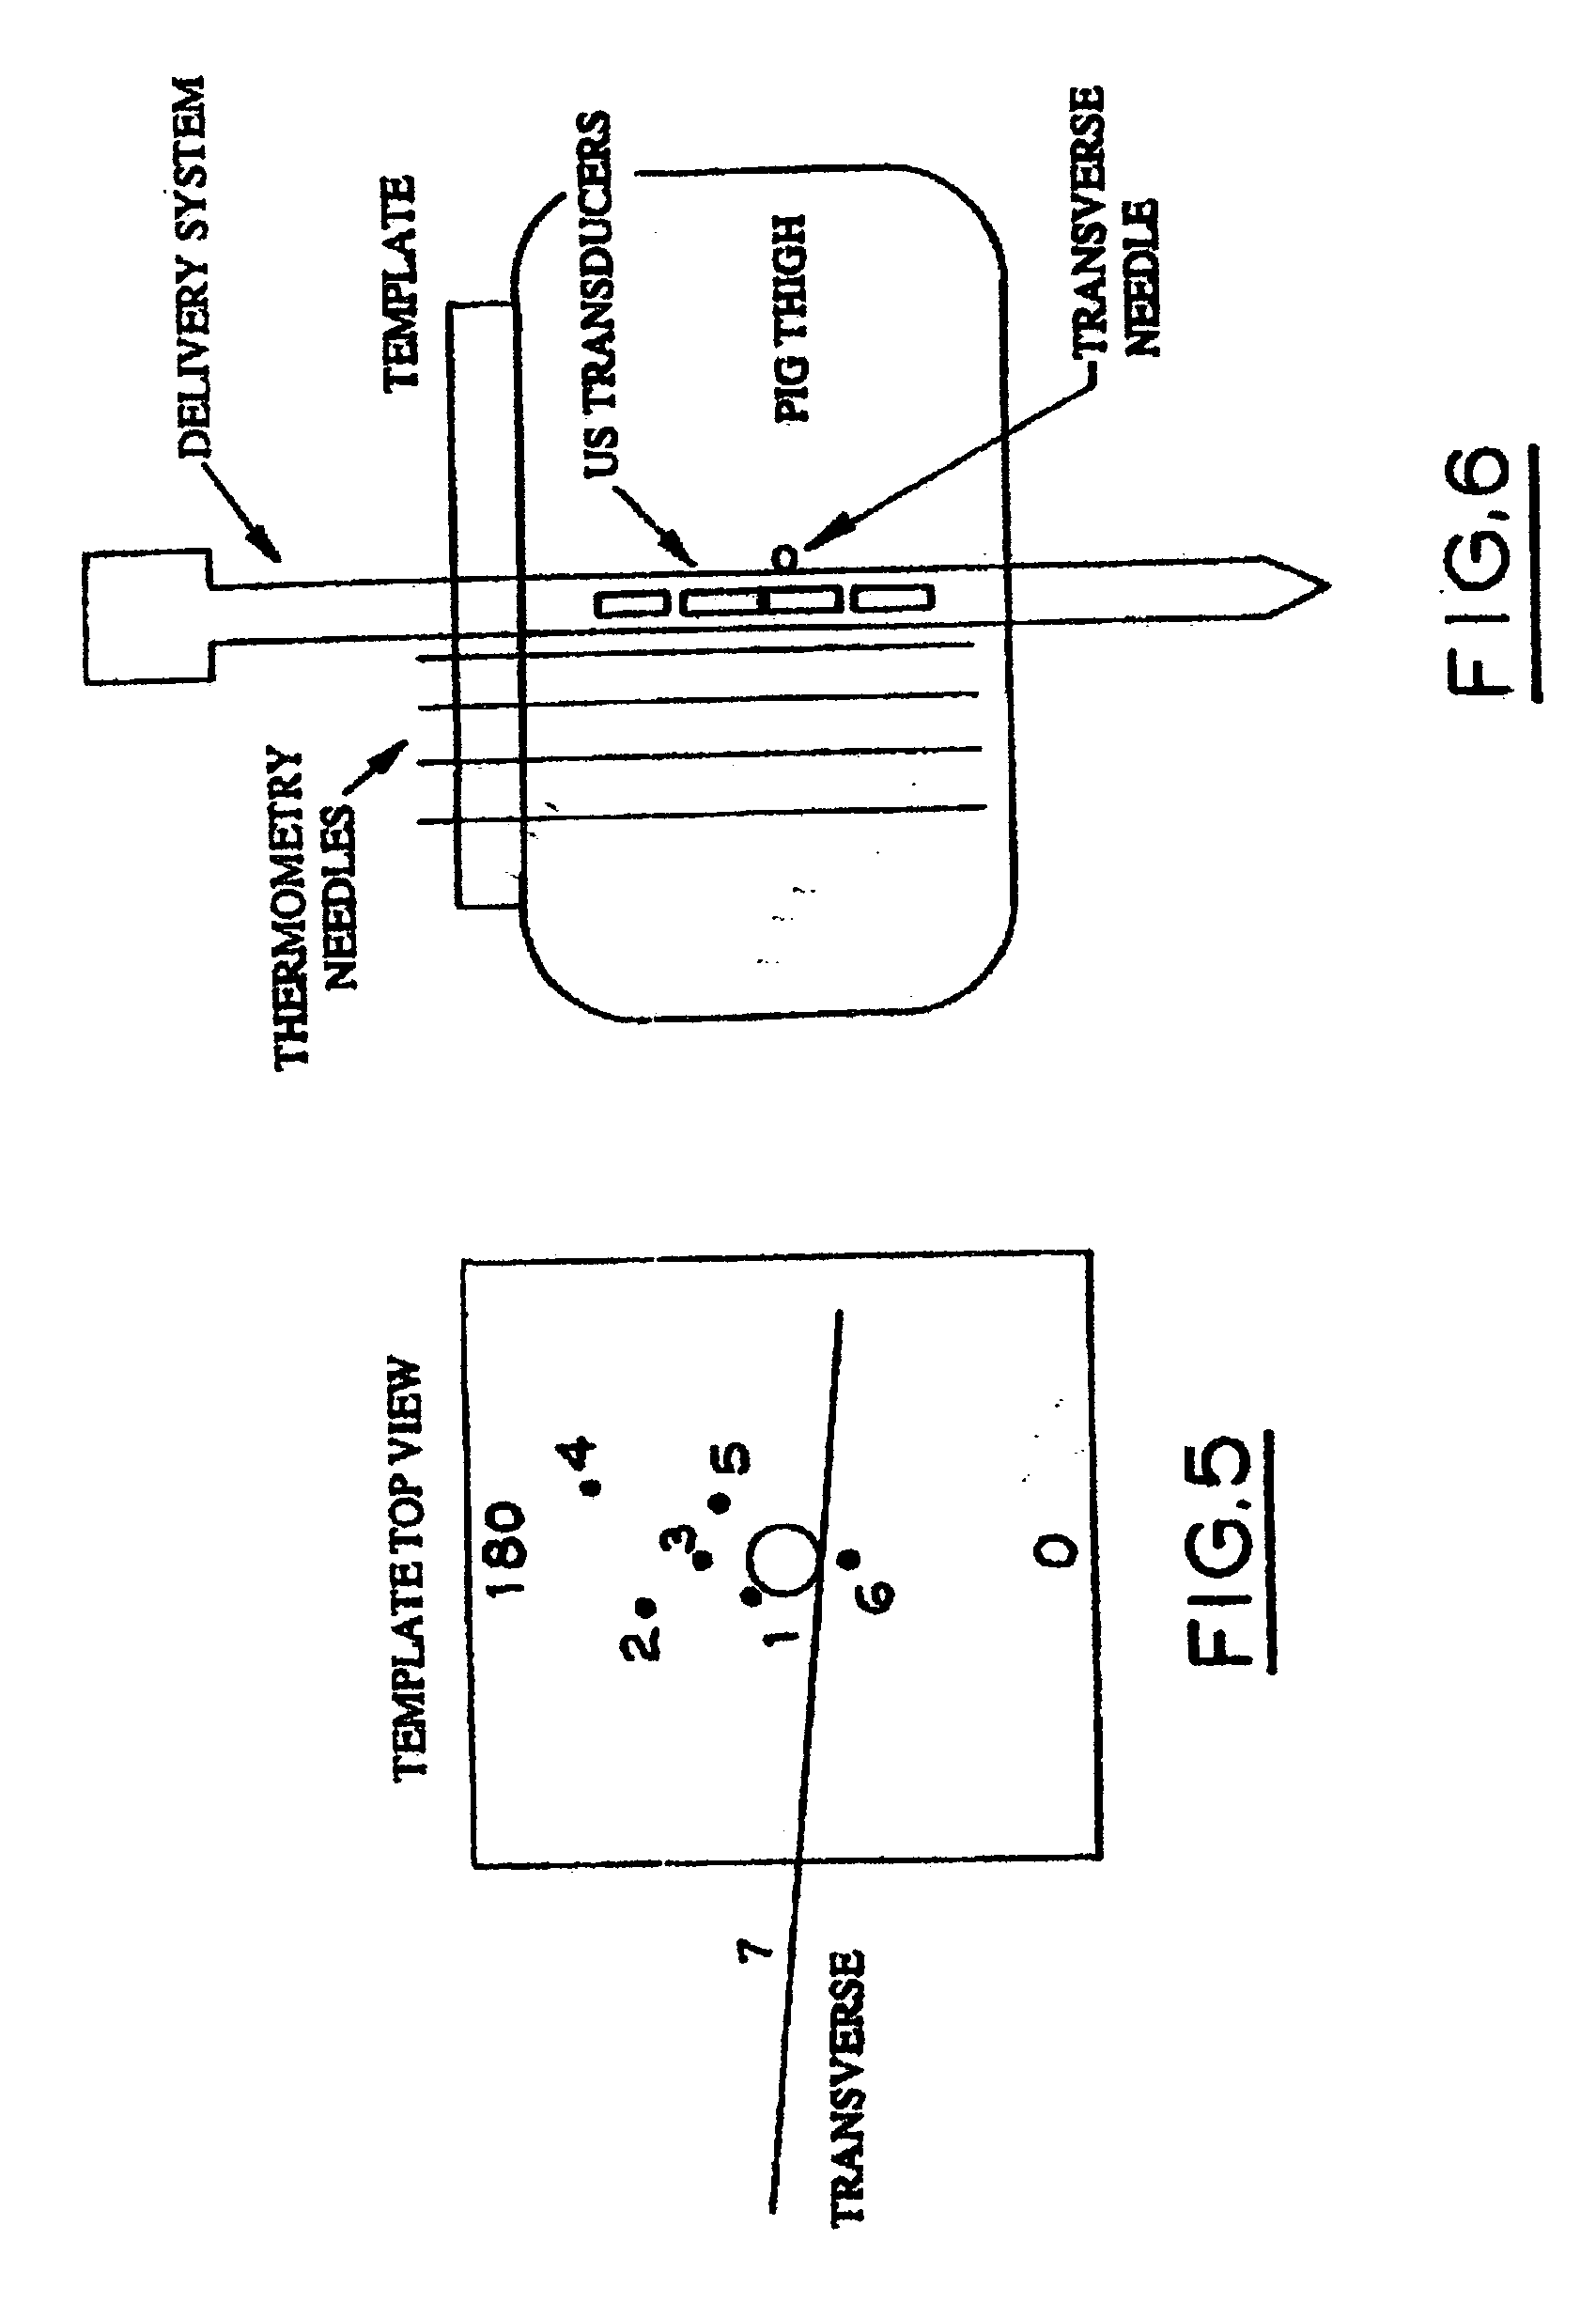 Method of manufacture of a transurethral ultrasound applicator for prostate gland thermal therapy